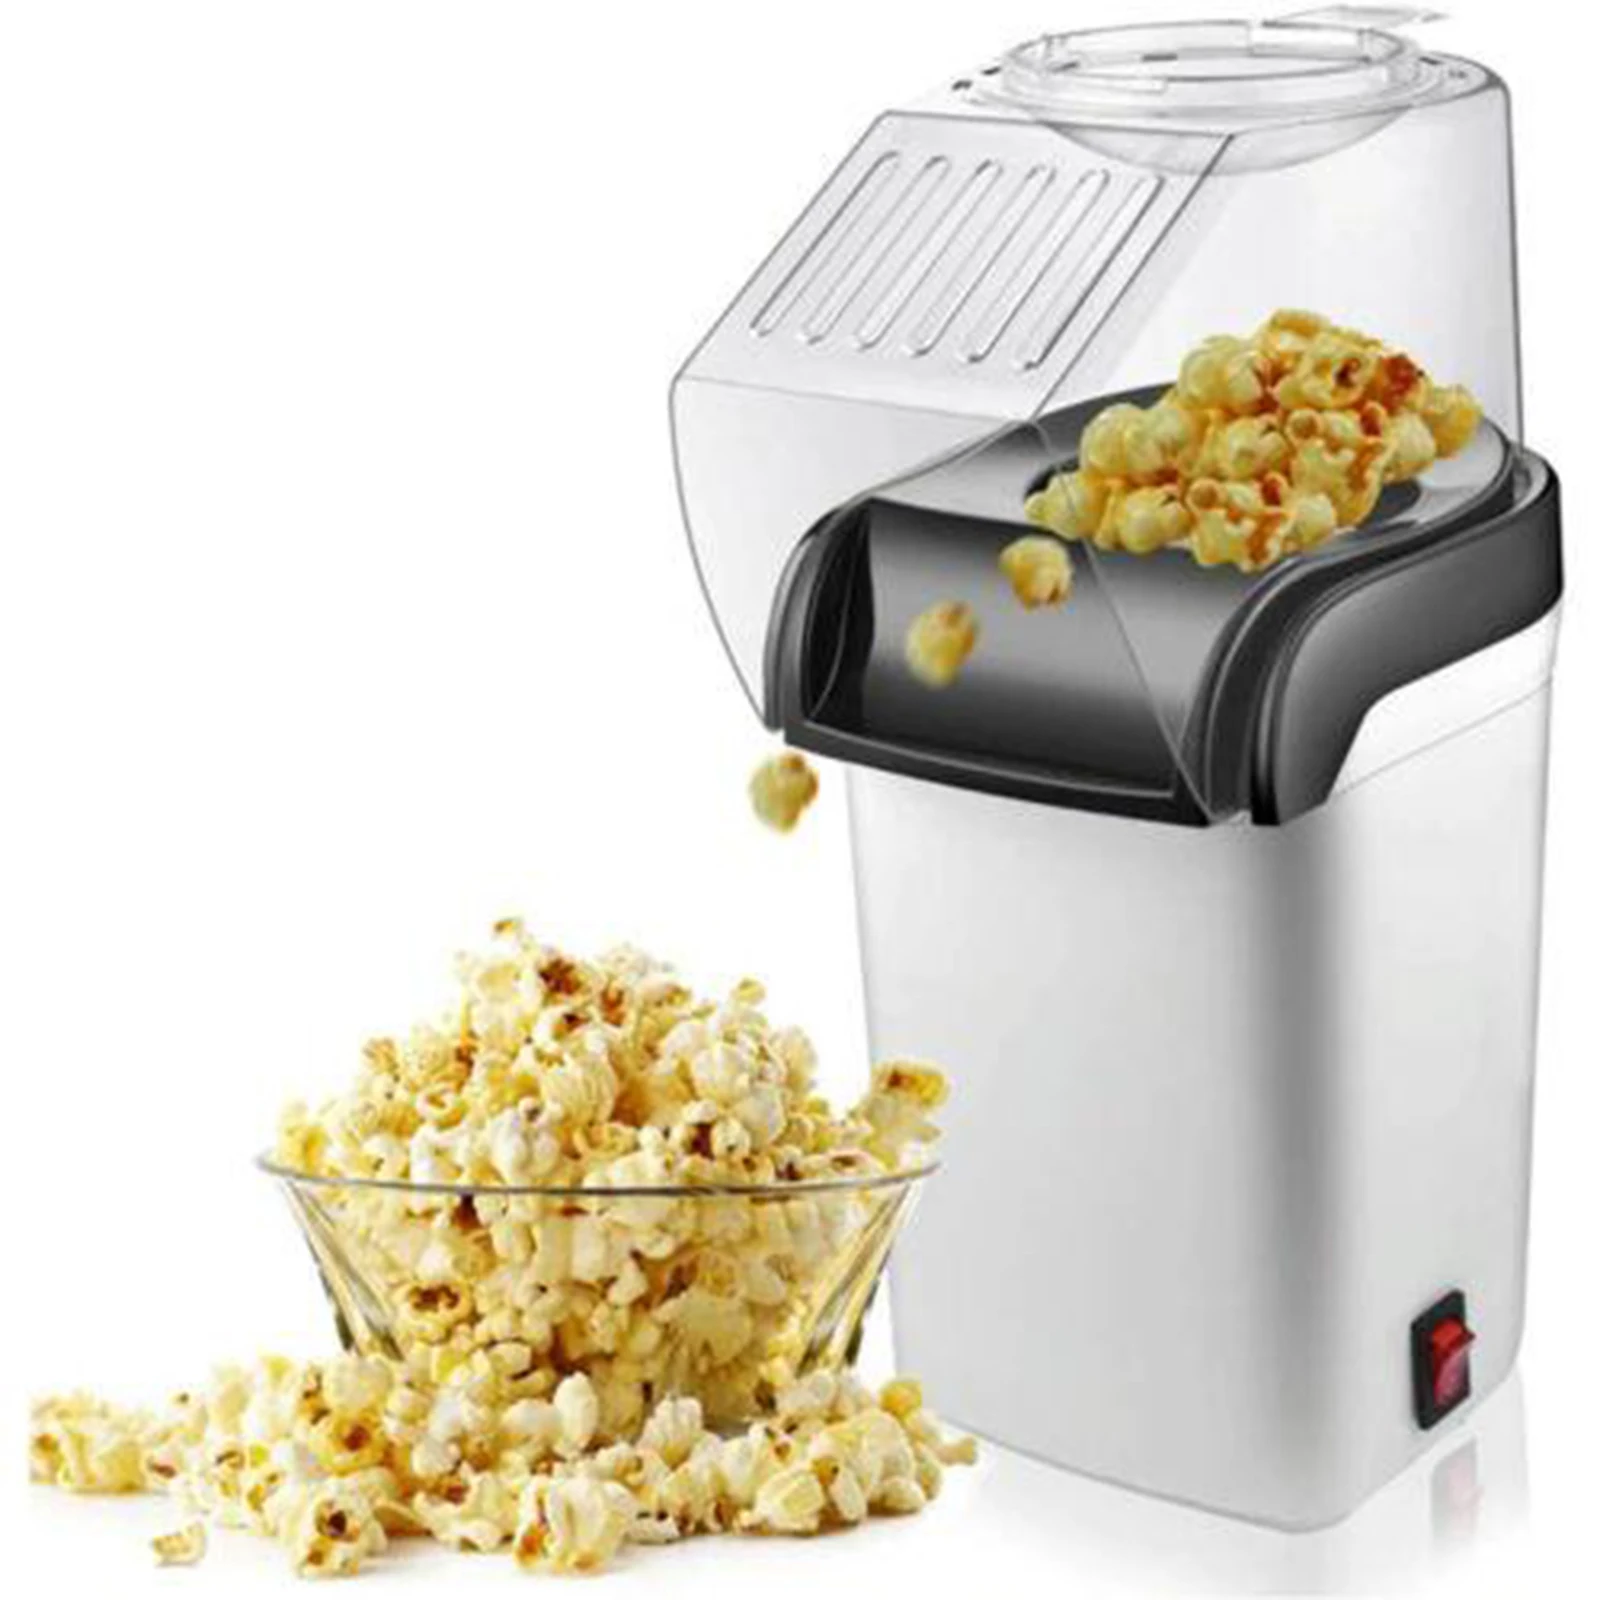 Hot Air Popcorn Machine, 1200W Electric Popcorn Maker, BPA-Free, 3 Minutes Fast Popcorn Popper and Top Lid for Home, Family